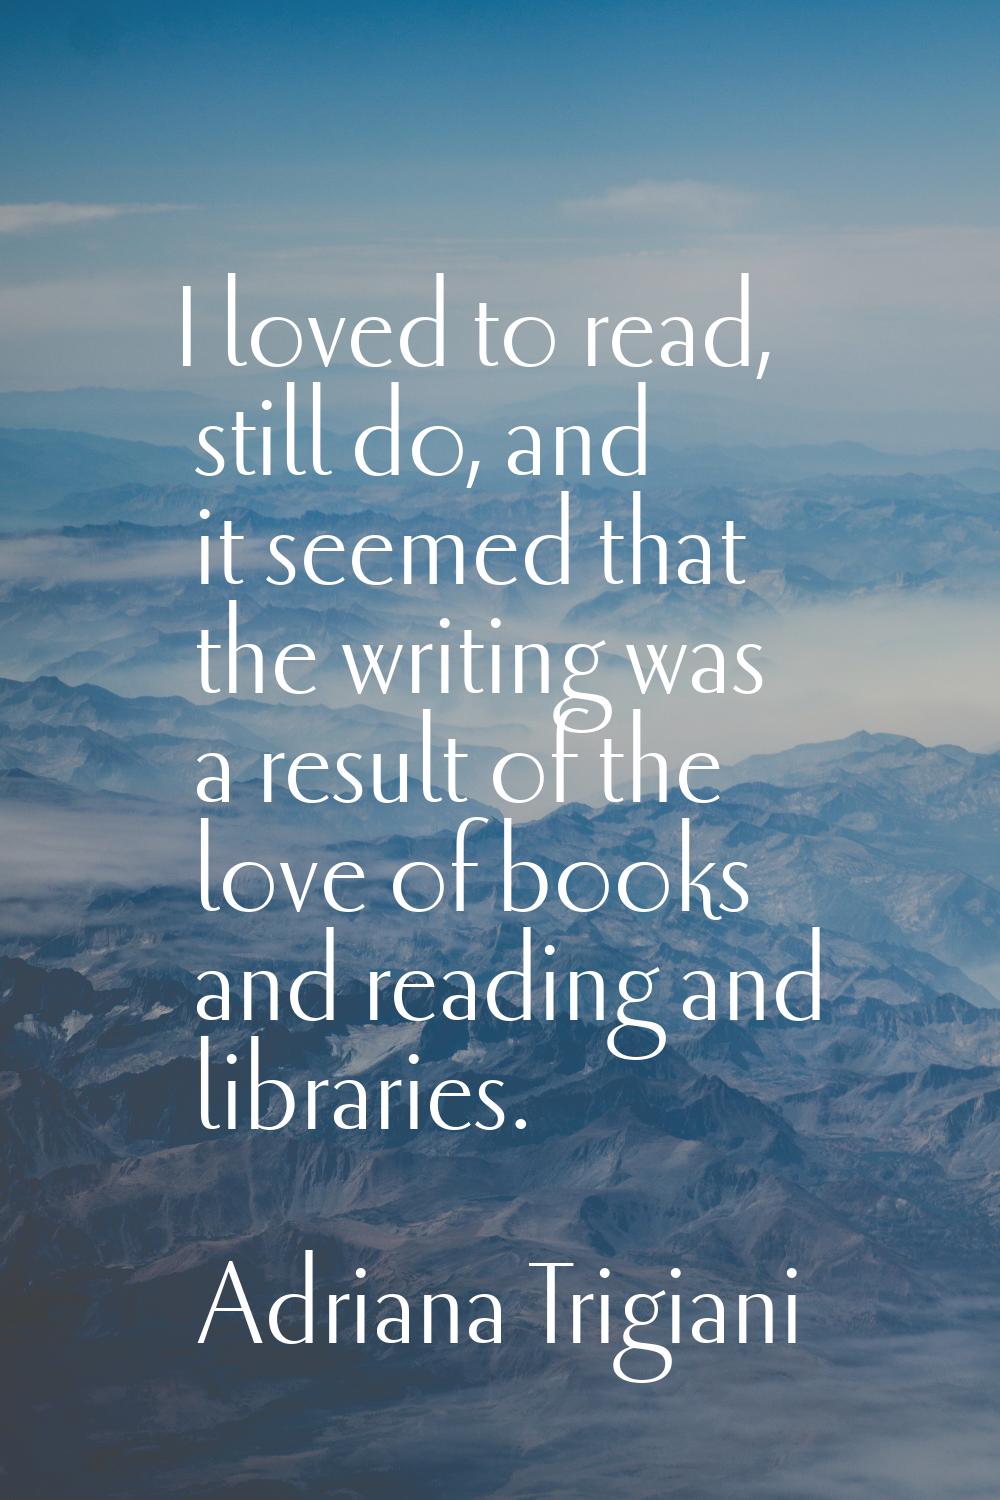 I loved to read, still do, and it seemed that the writing was a result of the love of books and rea